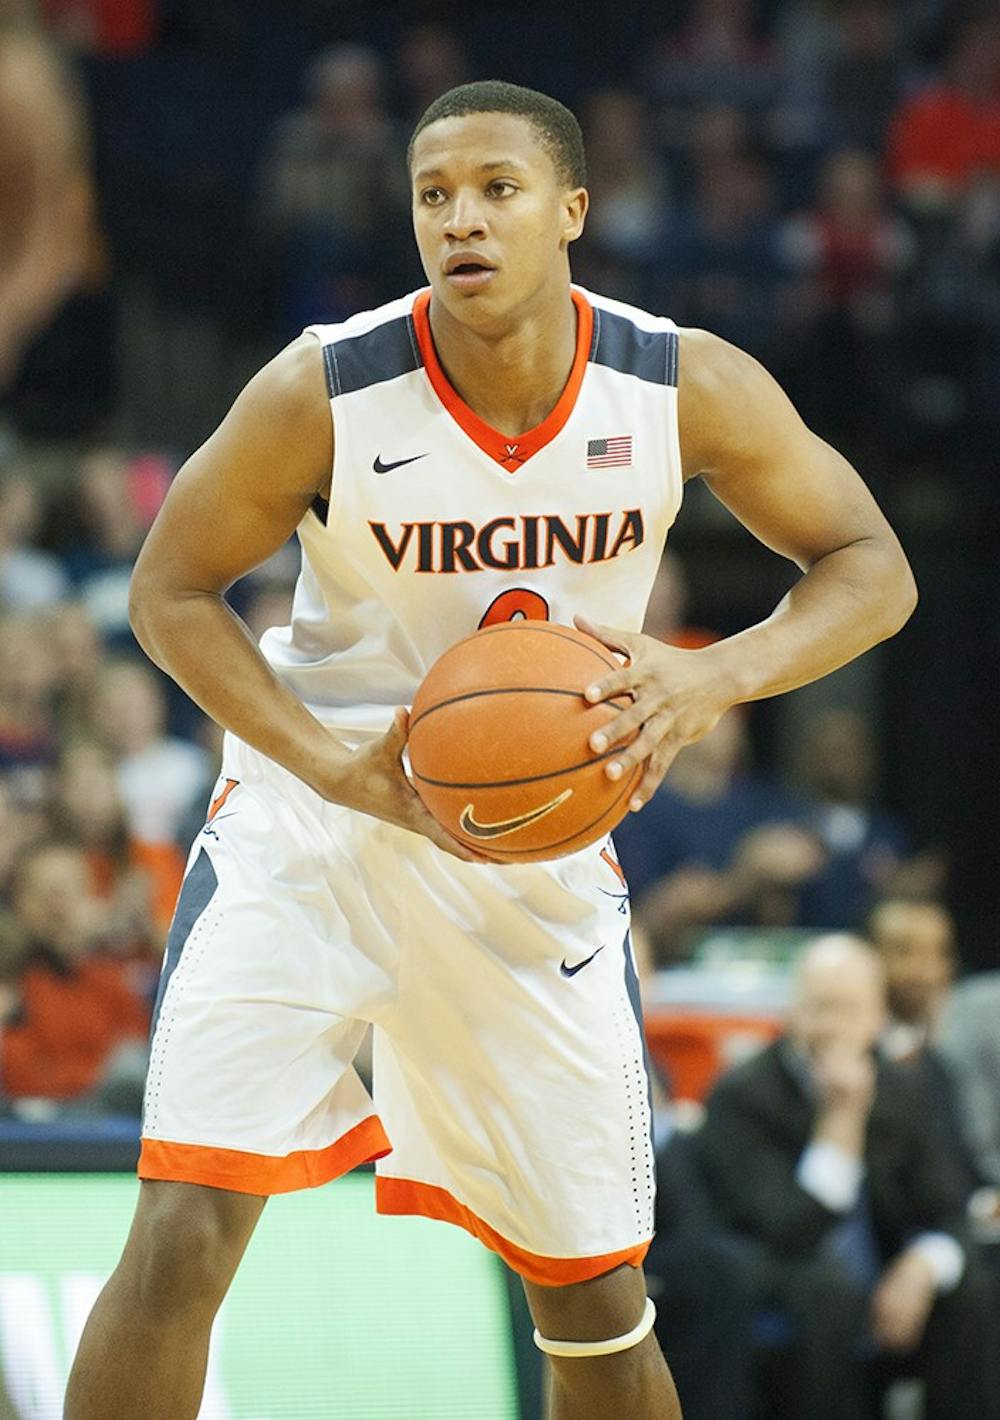 <p>Redshirt sophomore guard Devon Hall wasn't the most efficient player&nbsp;Saturday against North Carolina, shooting only 3-for-11 from the floor, but his aggressiveness aided Virginia behind the arc and at the free-throw line. If Hall plays with that same confidence in the postseason, the Cavaliers should be all the better offensively.&nbsp; </p>